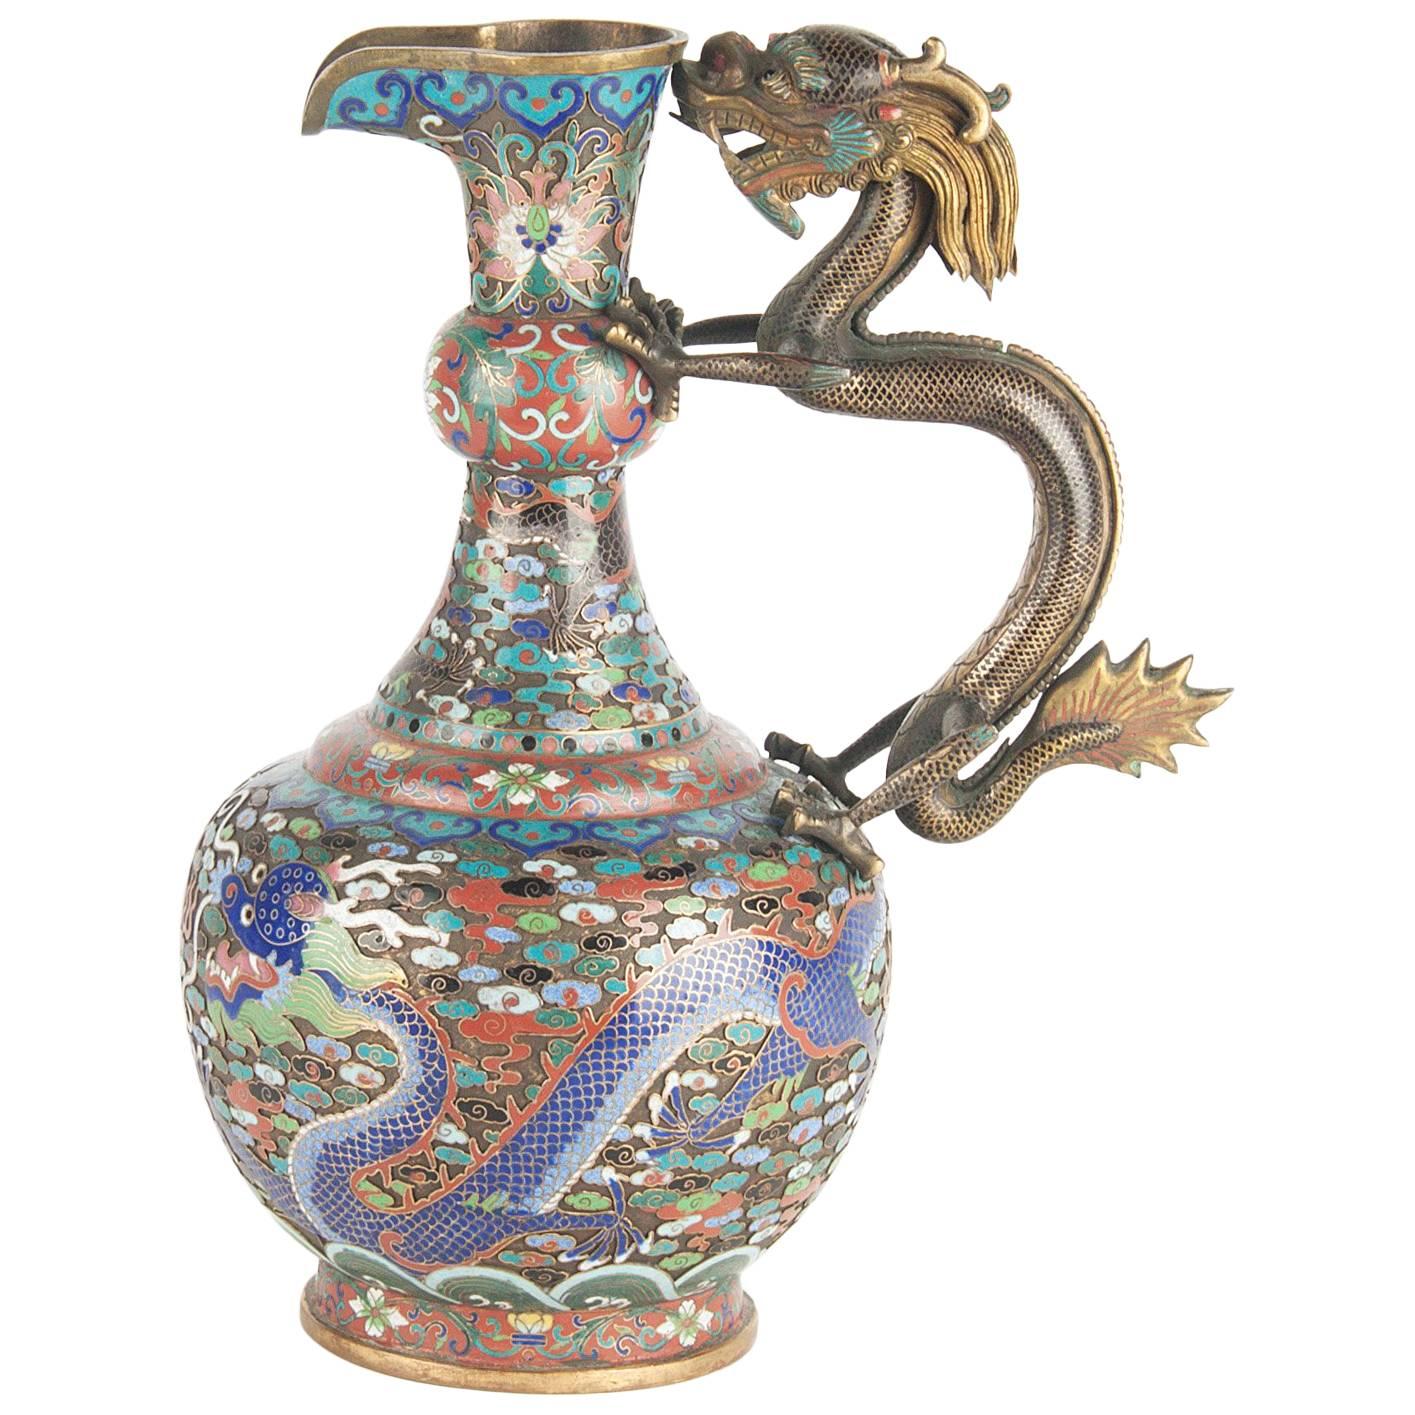 Important Antique Chinese Cloisonne Ewer, late 19th Century